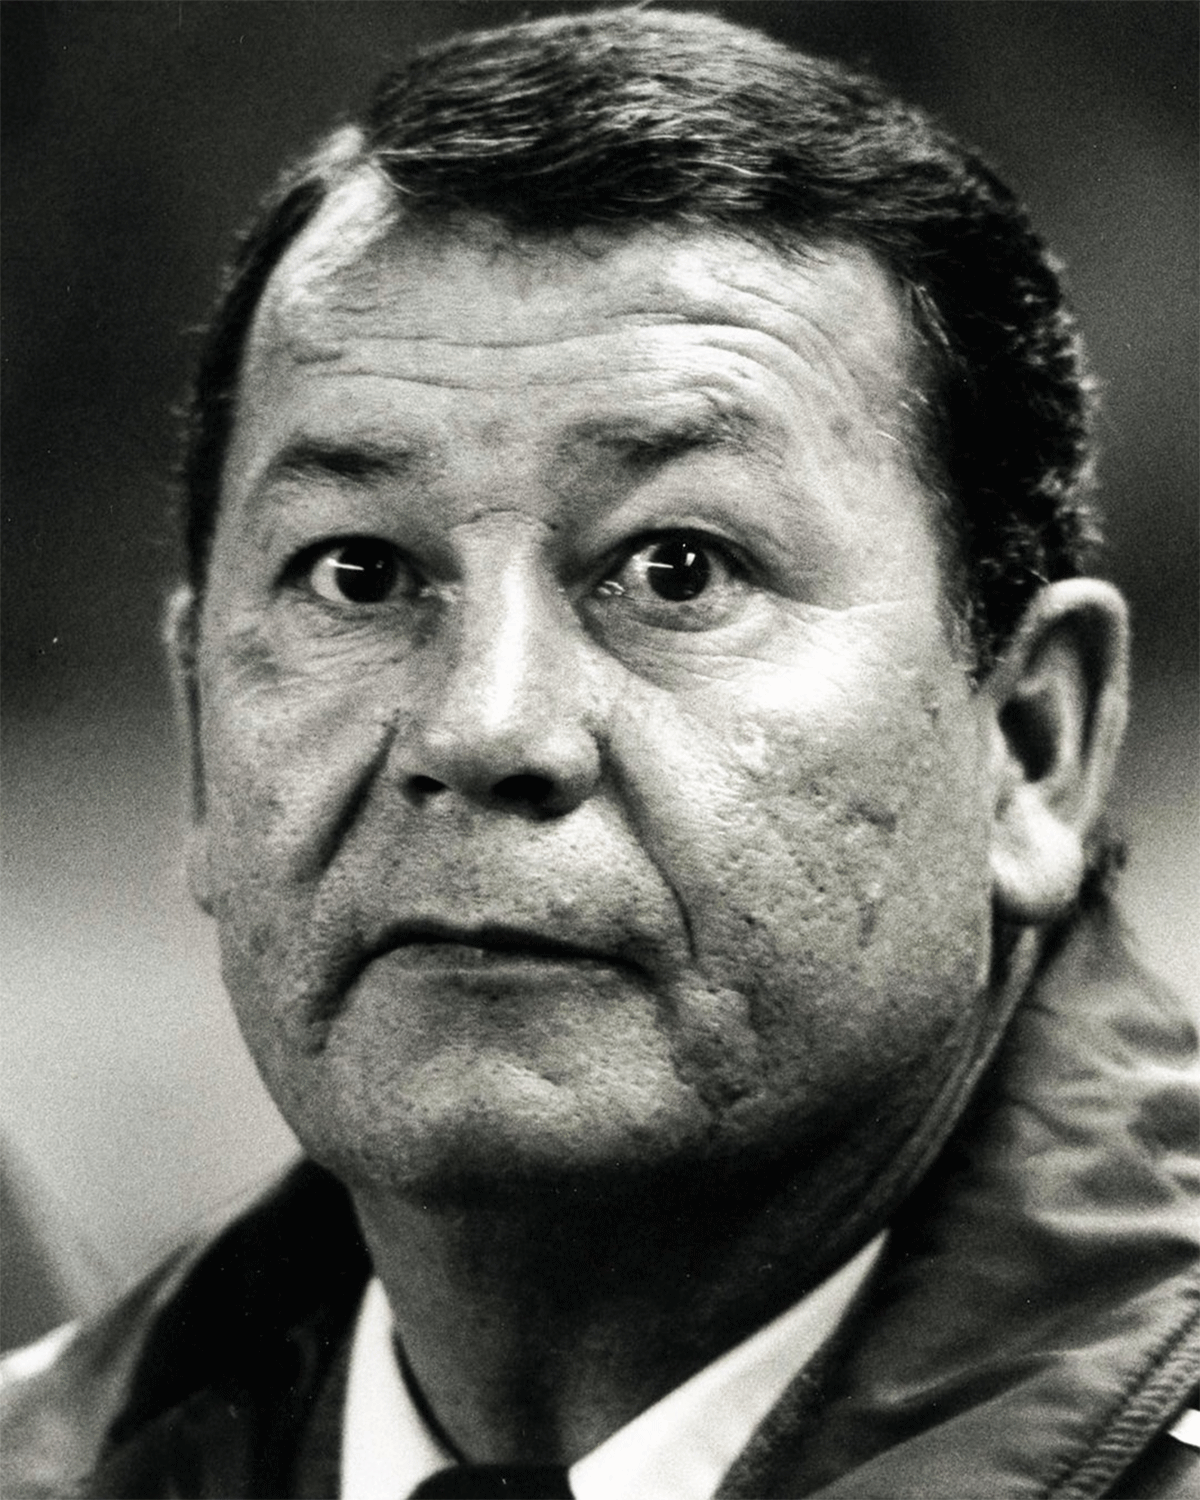 Frenchman Just Fontaine scored a record 13 goals in a single edition of the World Cup